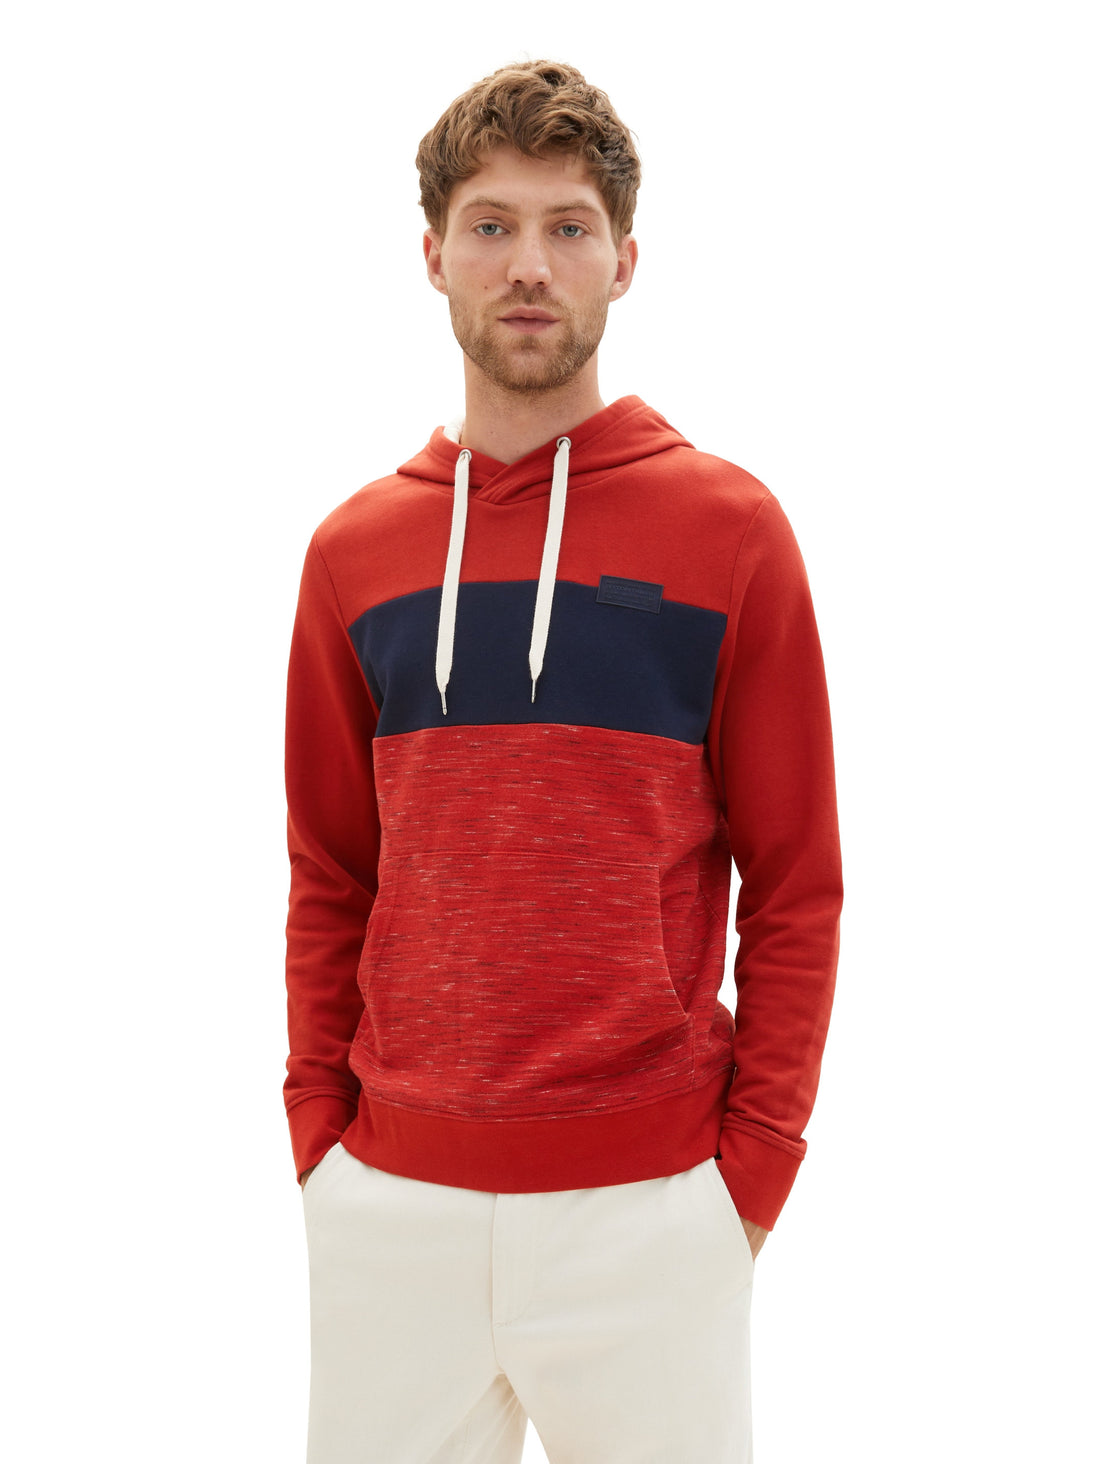 Hoodie With Color Block Design_1037834_32436_02